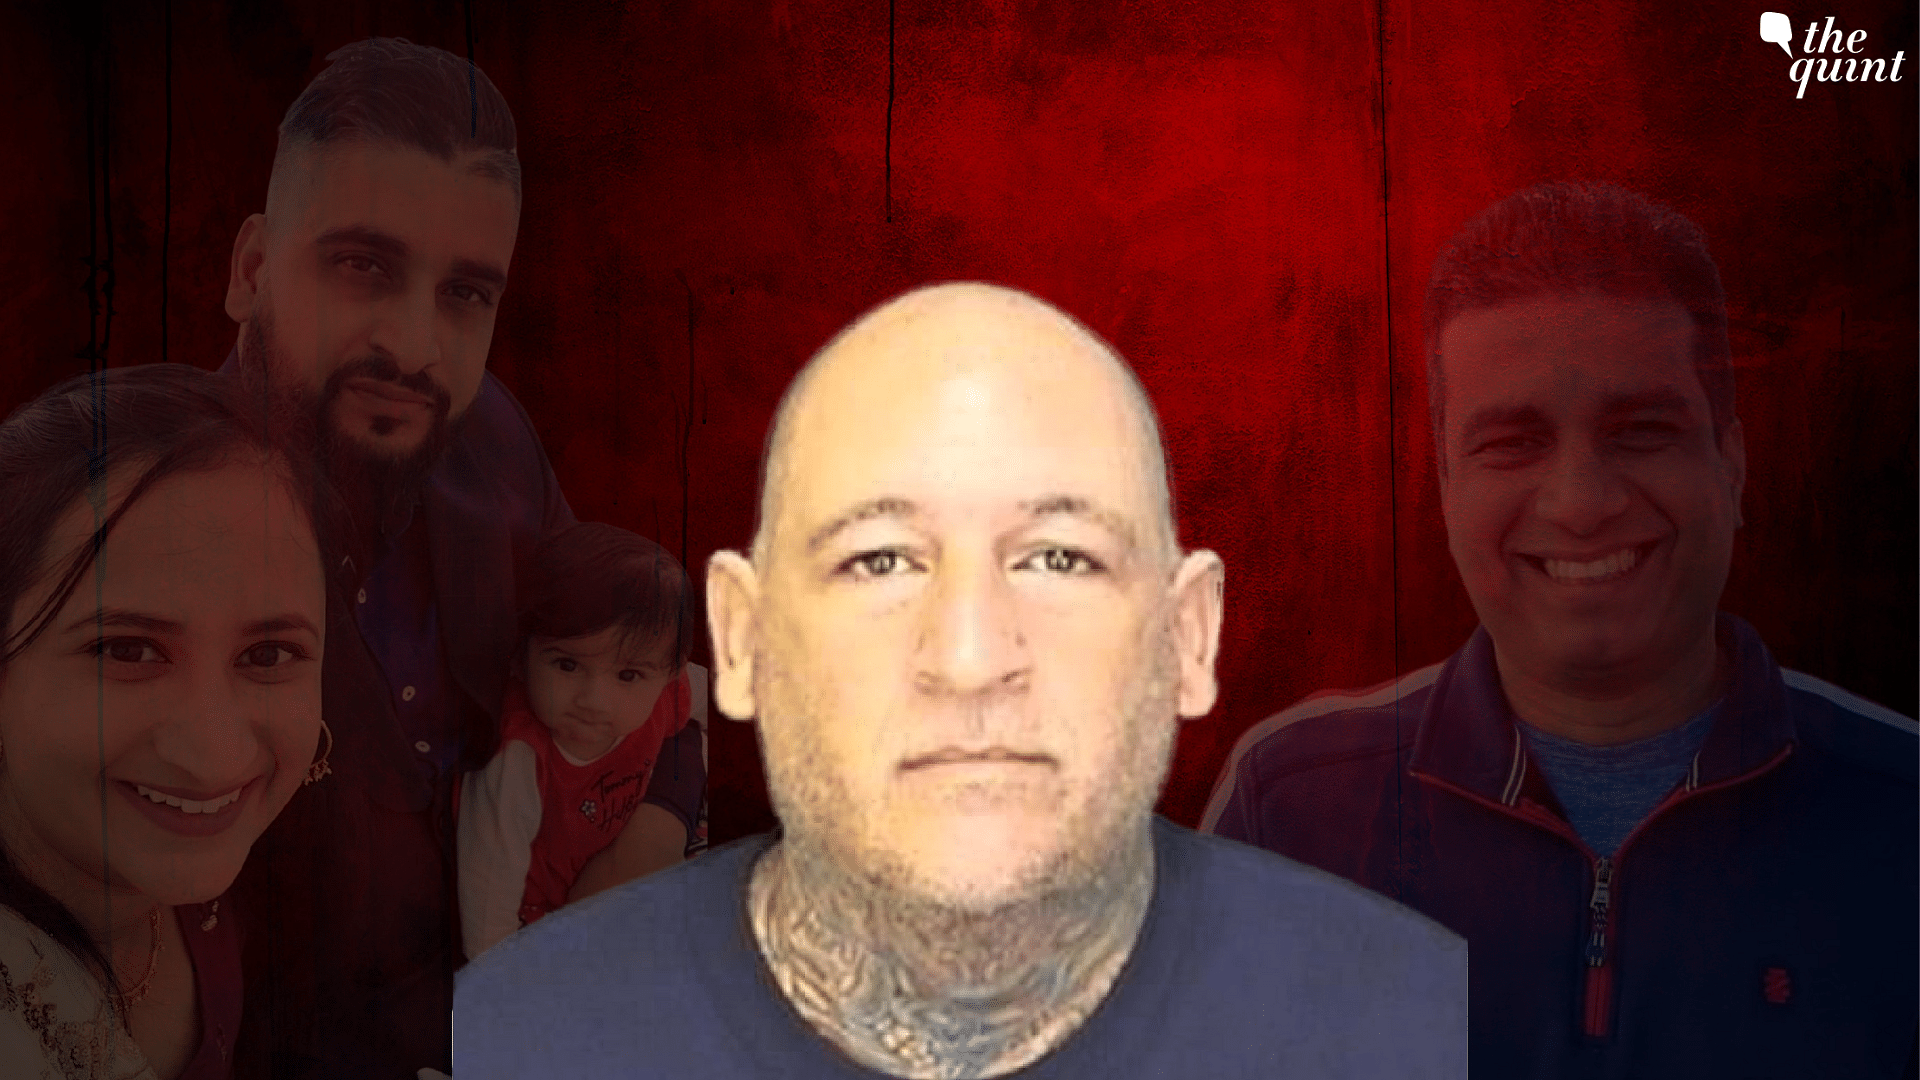 <div class="paragraphs"><p>The Merced County Sheriff’s Office booked Jesus Manuel Salgado for <a href="https://www.thequint.com/us-nri-news/kidnapped-indian-family-four-california-deceased">kidnapping and murdering</a> an Indian-origin family of four in California and sent him to  county jail.</p></div>